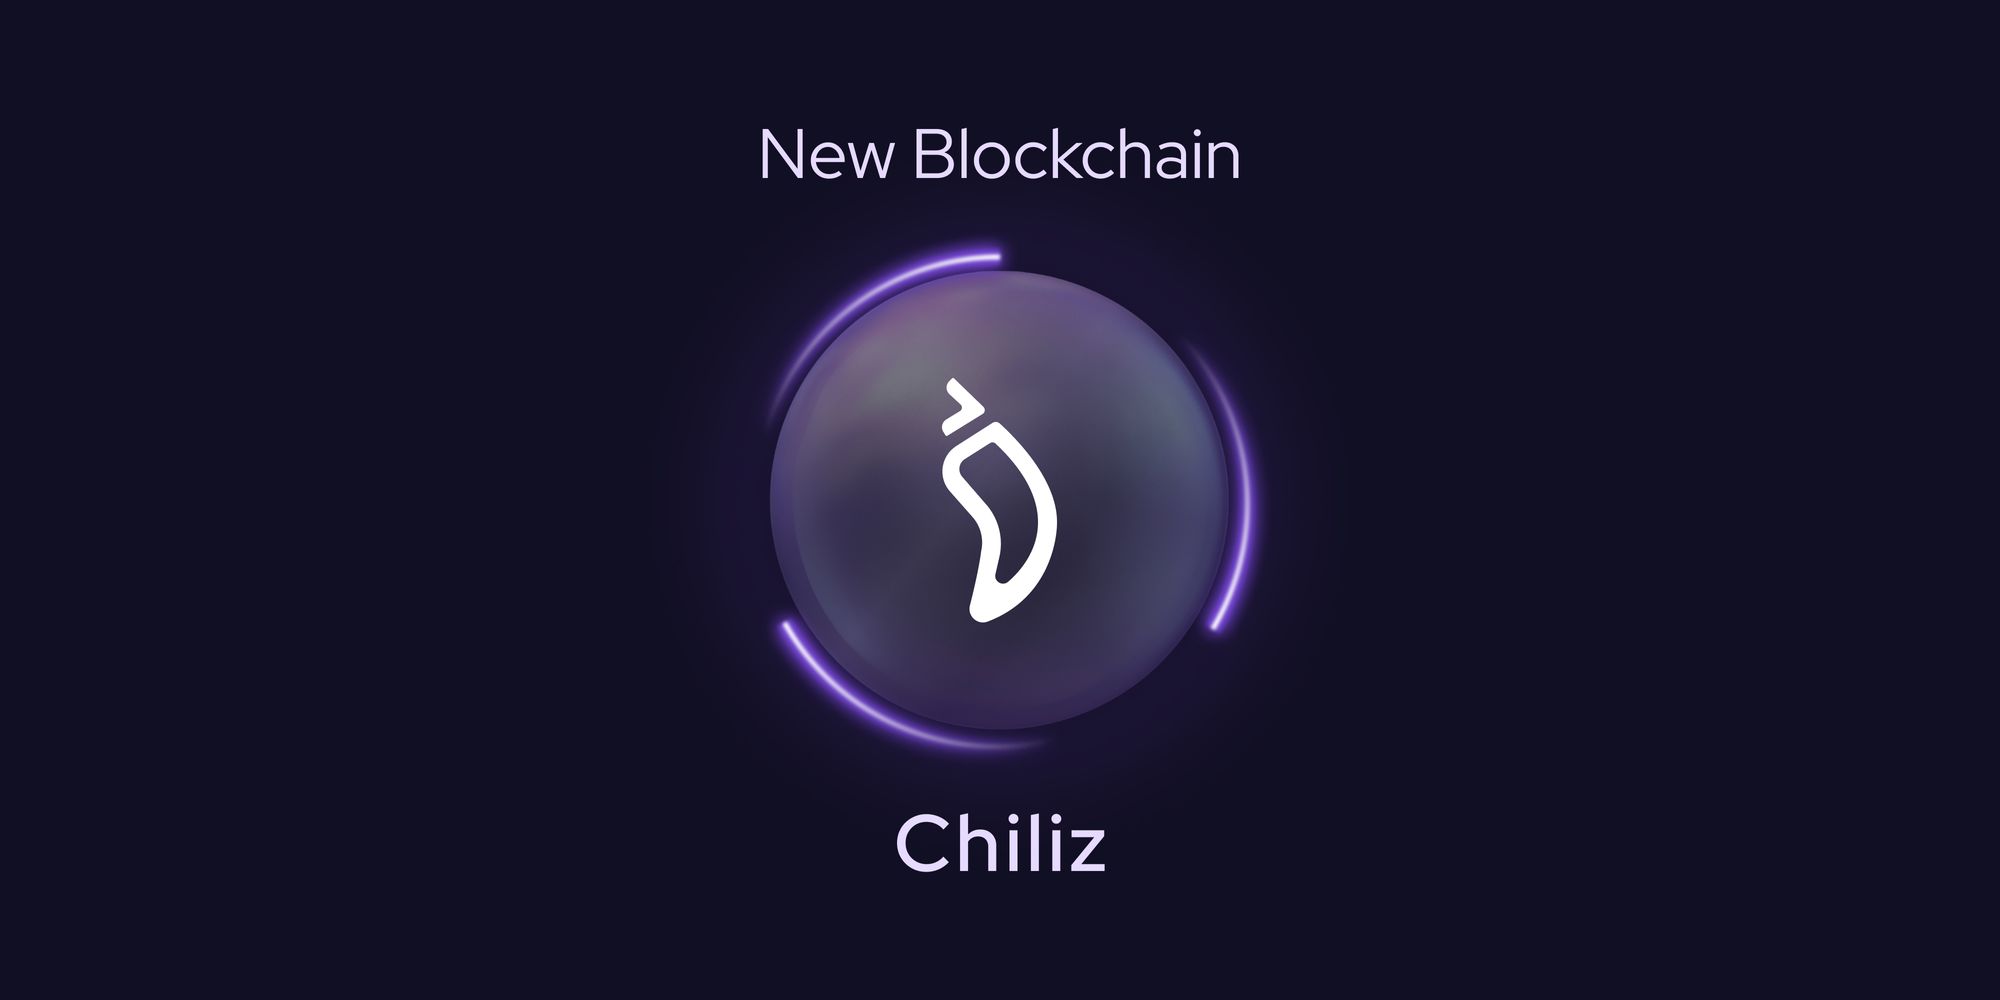 Pyth Price Feeds Now Available on Chiliz Chain